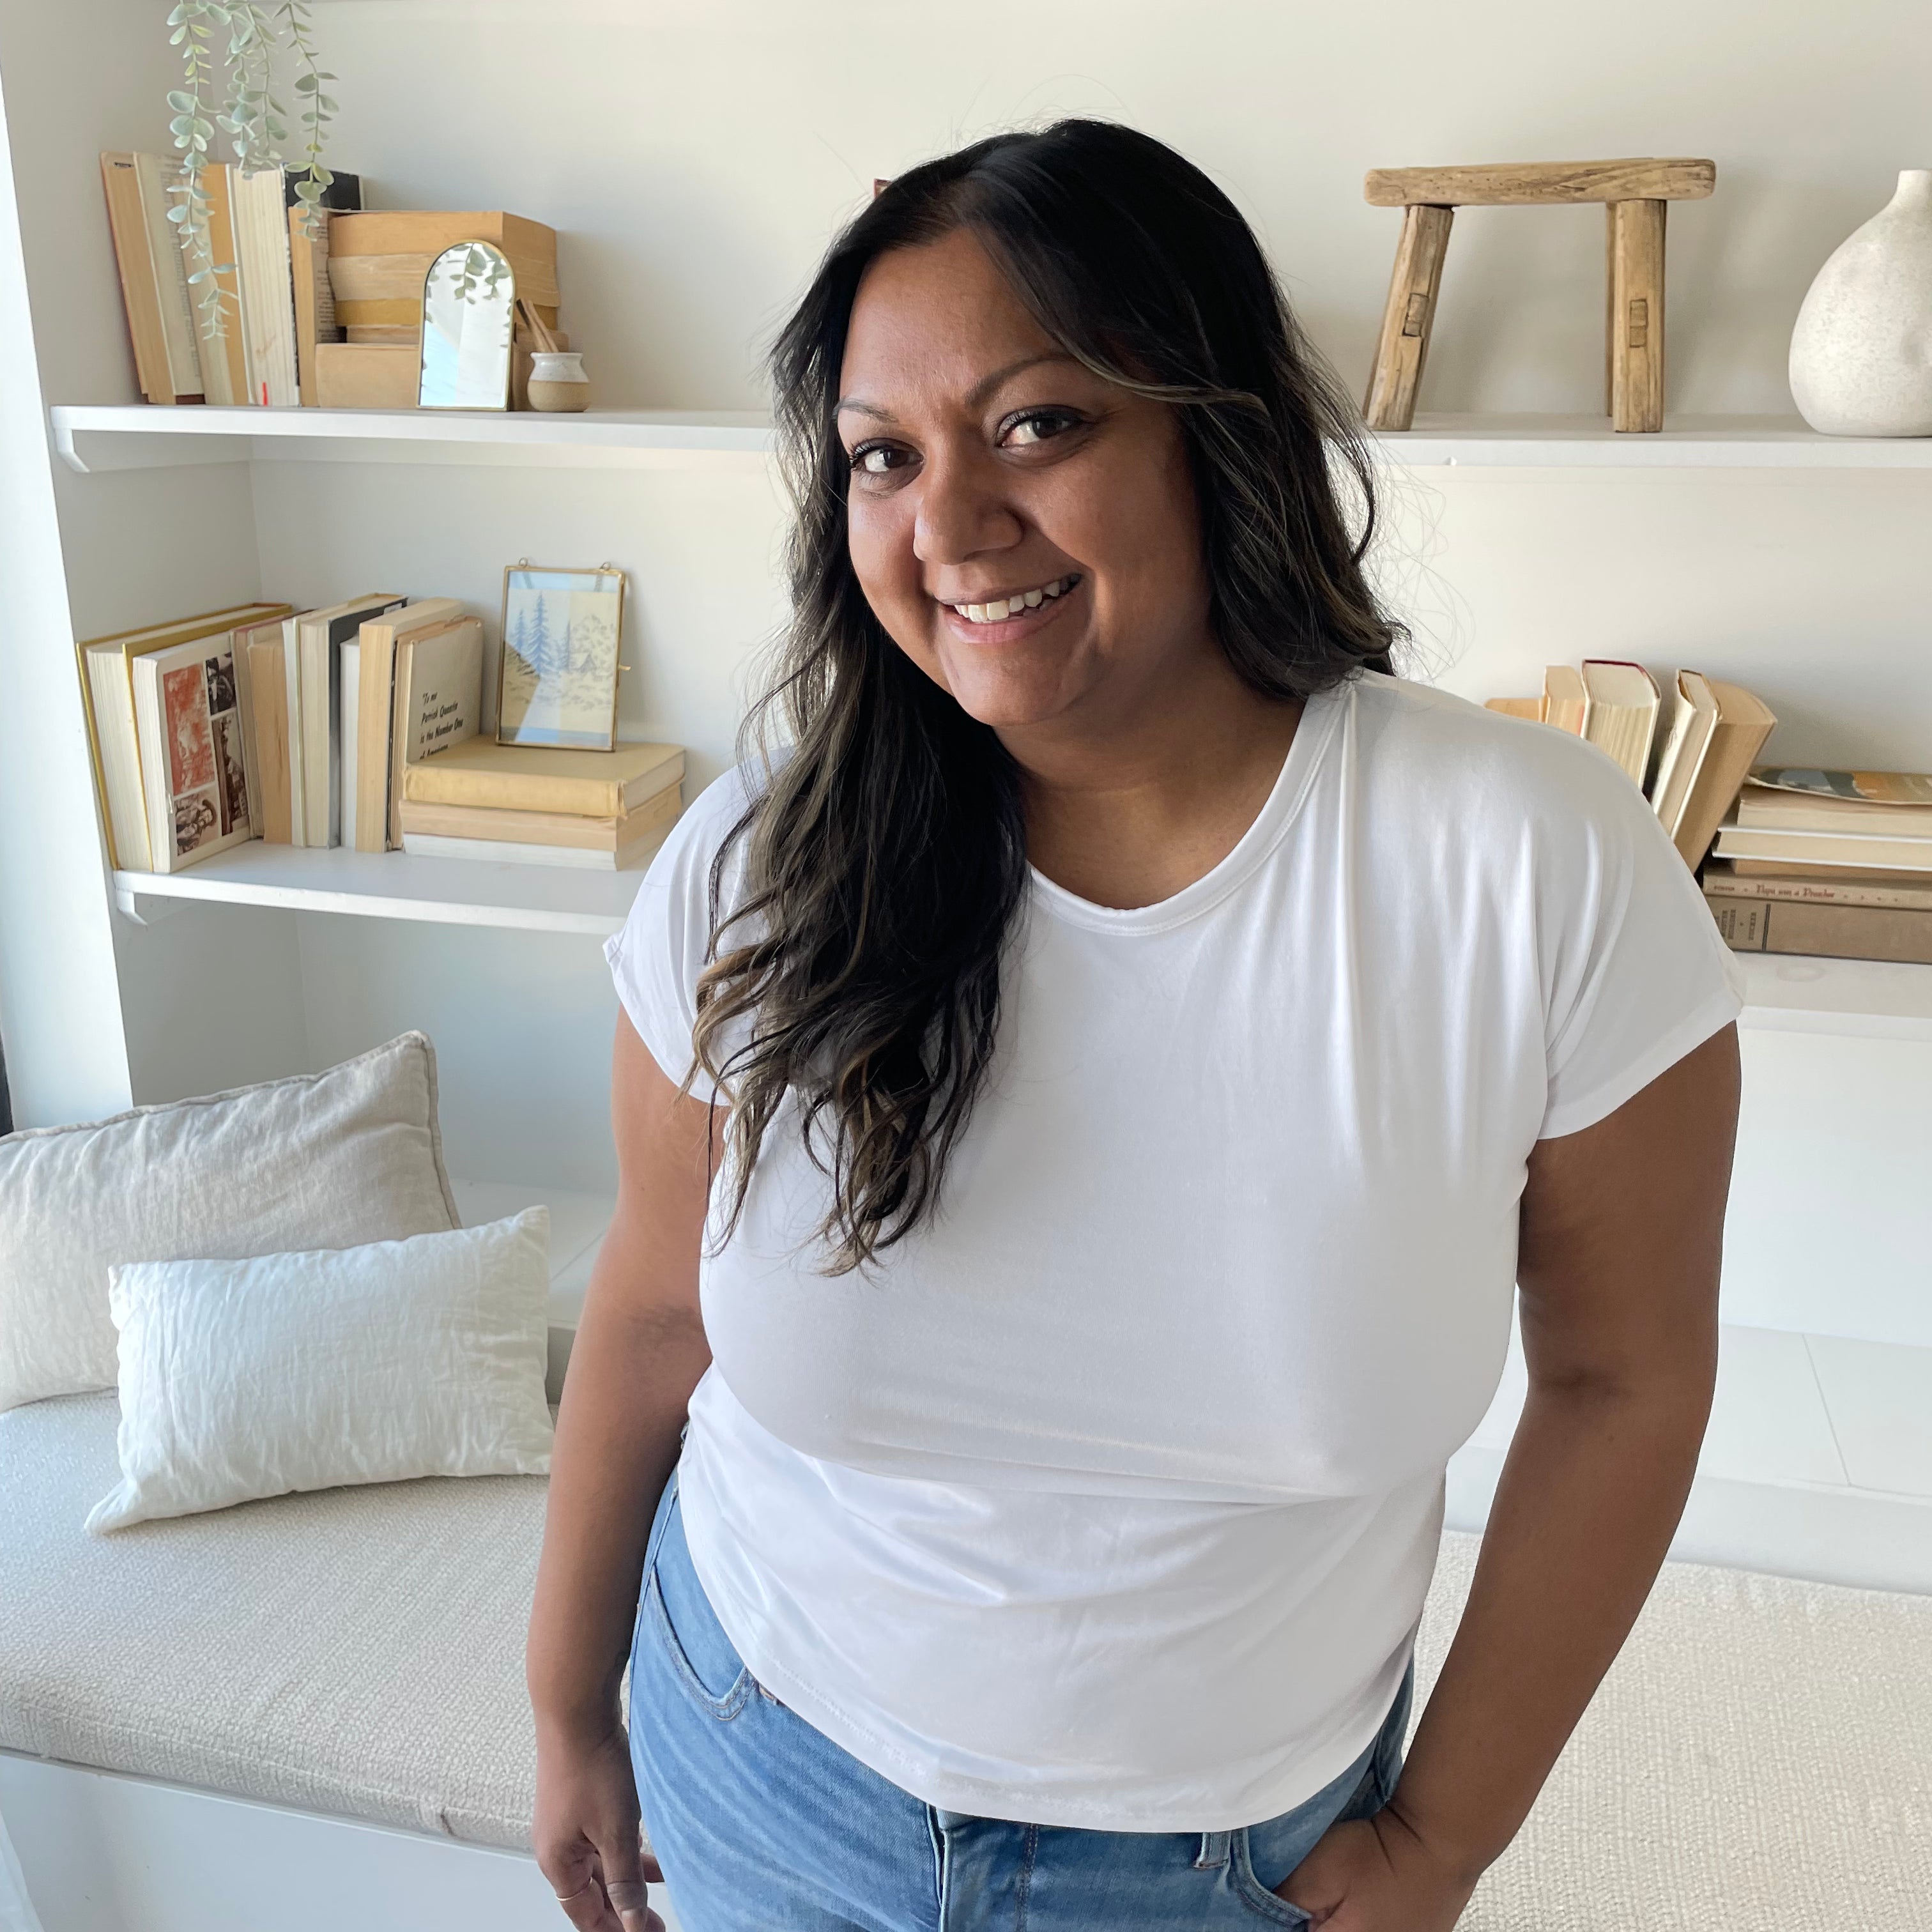 indian woman smiling wearing a white crewneck bamboo t-shirt and jeans